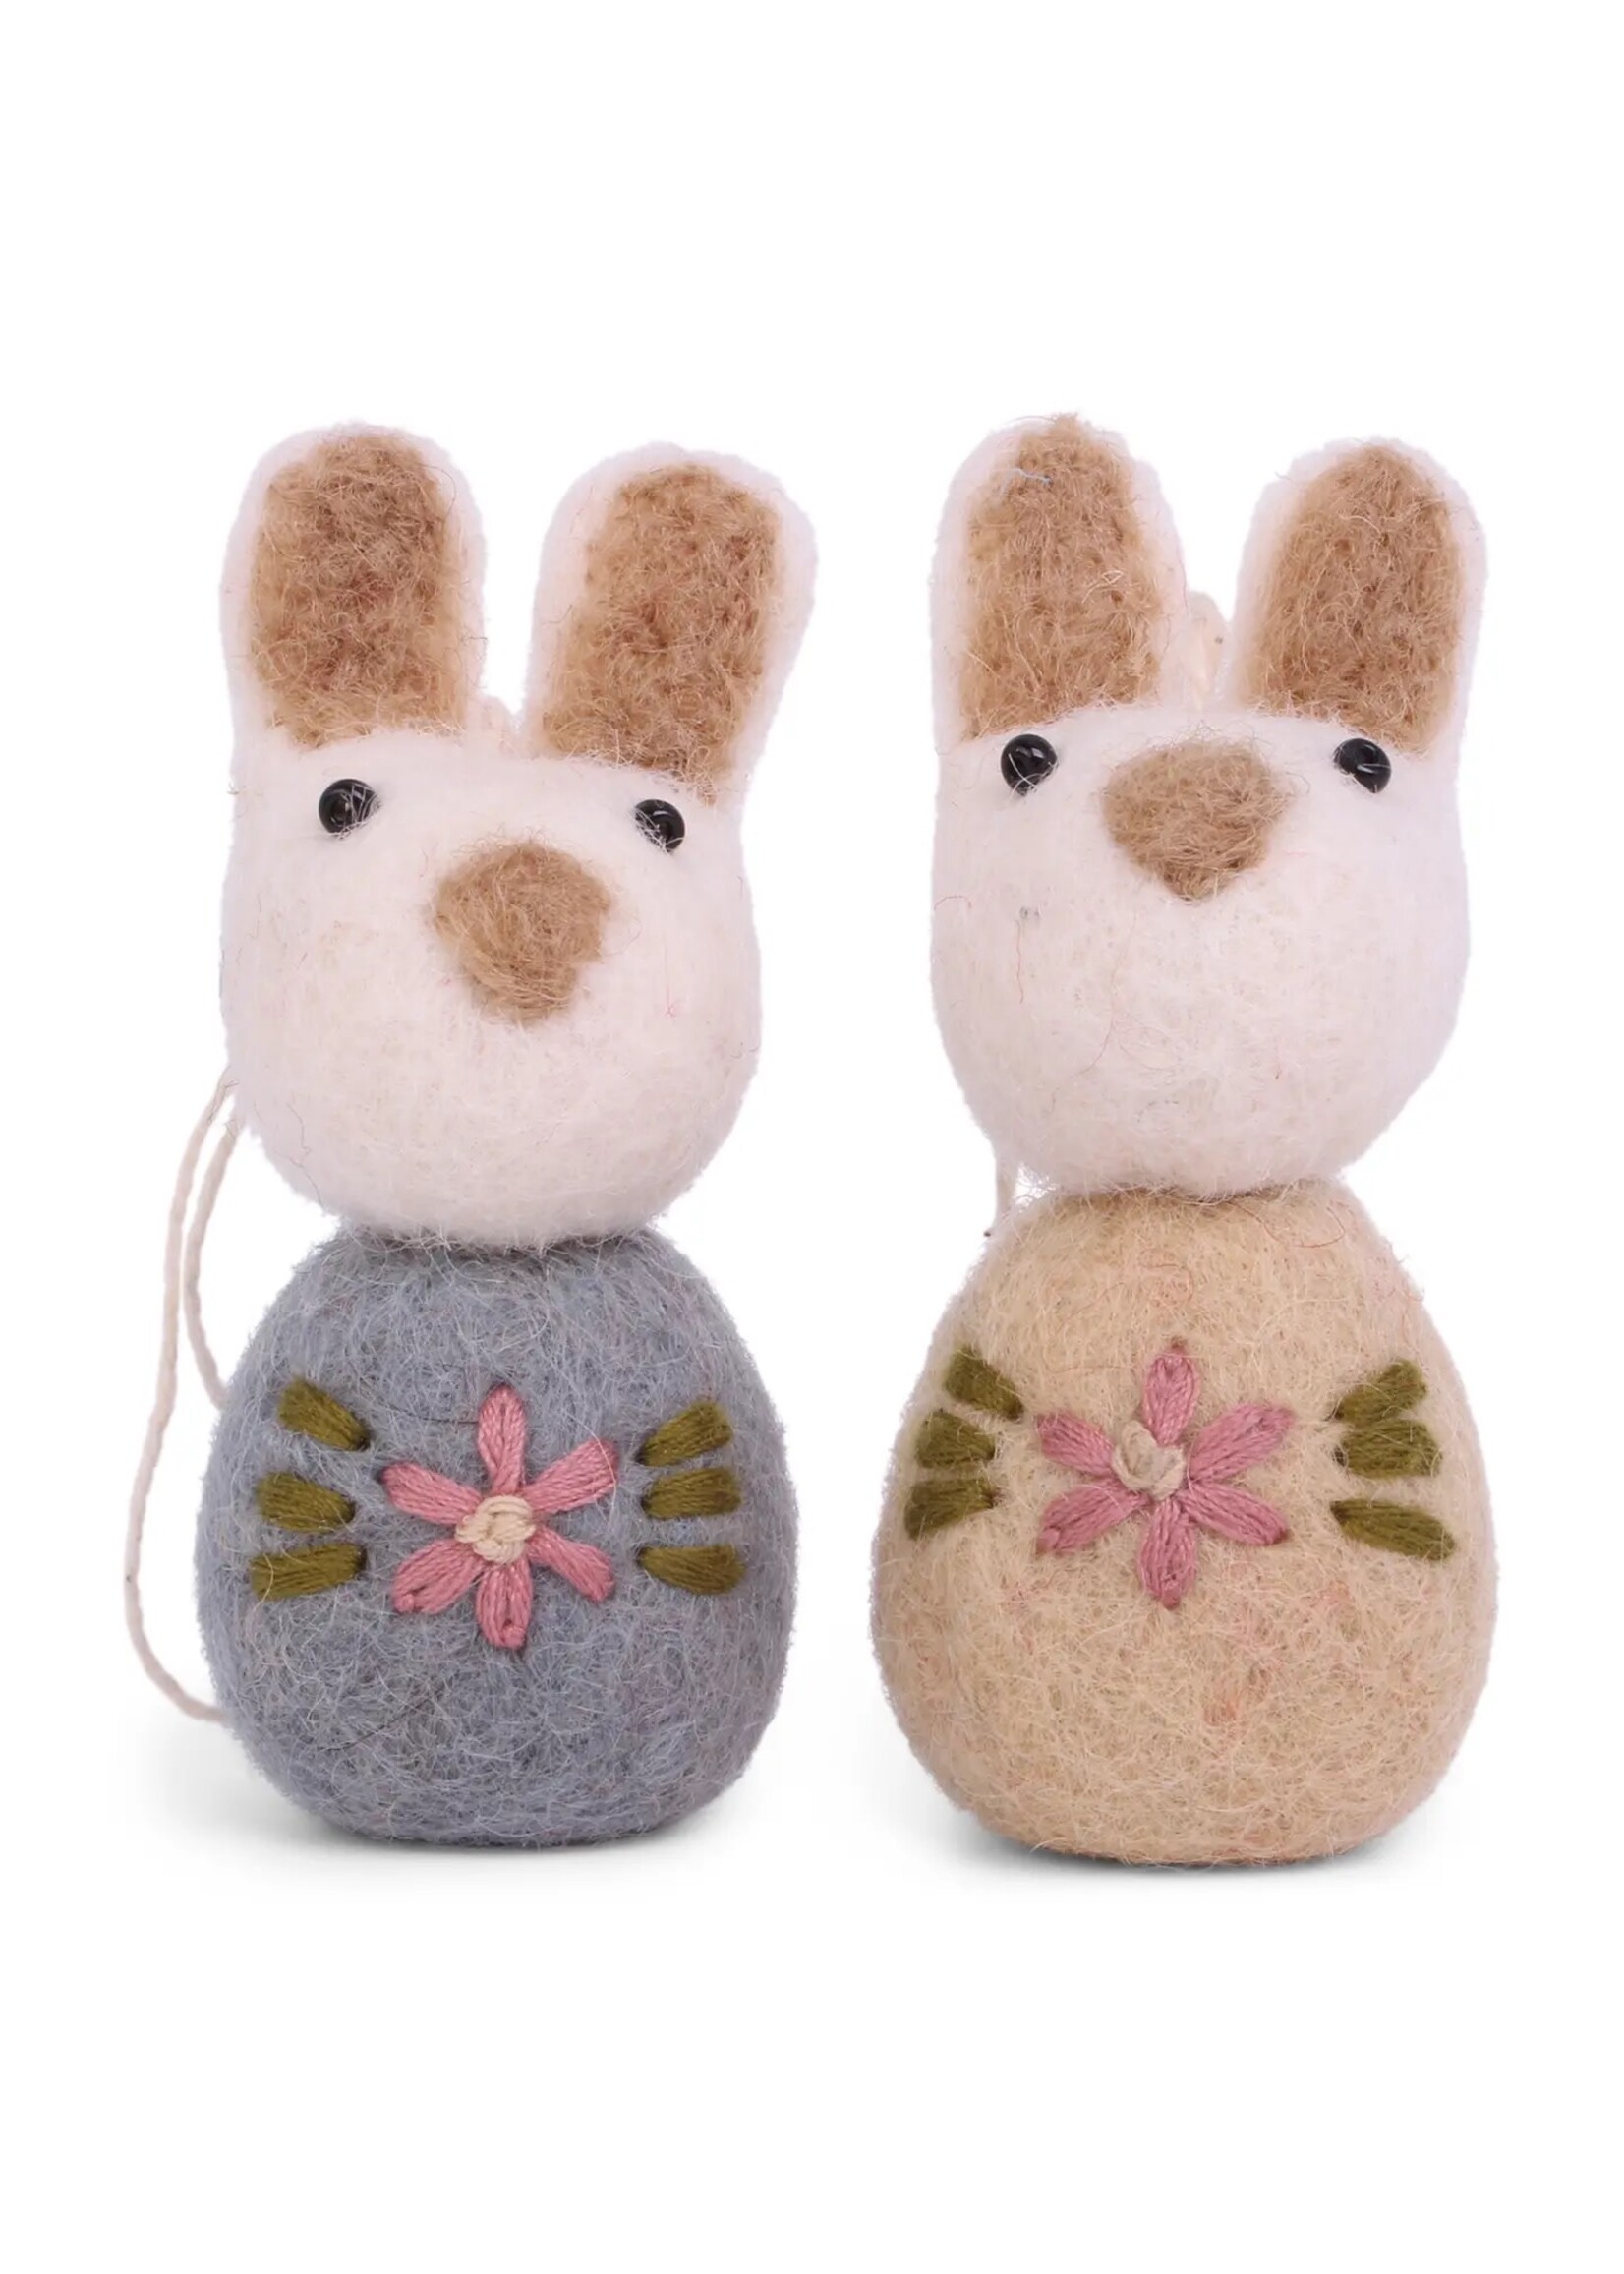 Bunny White with Flower Embroidery - Set of 2